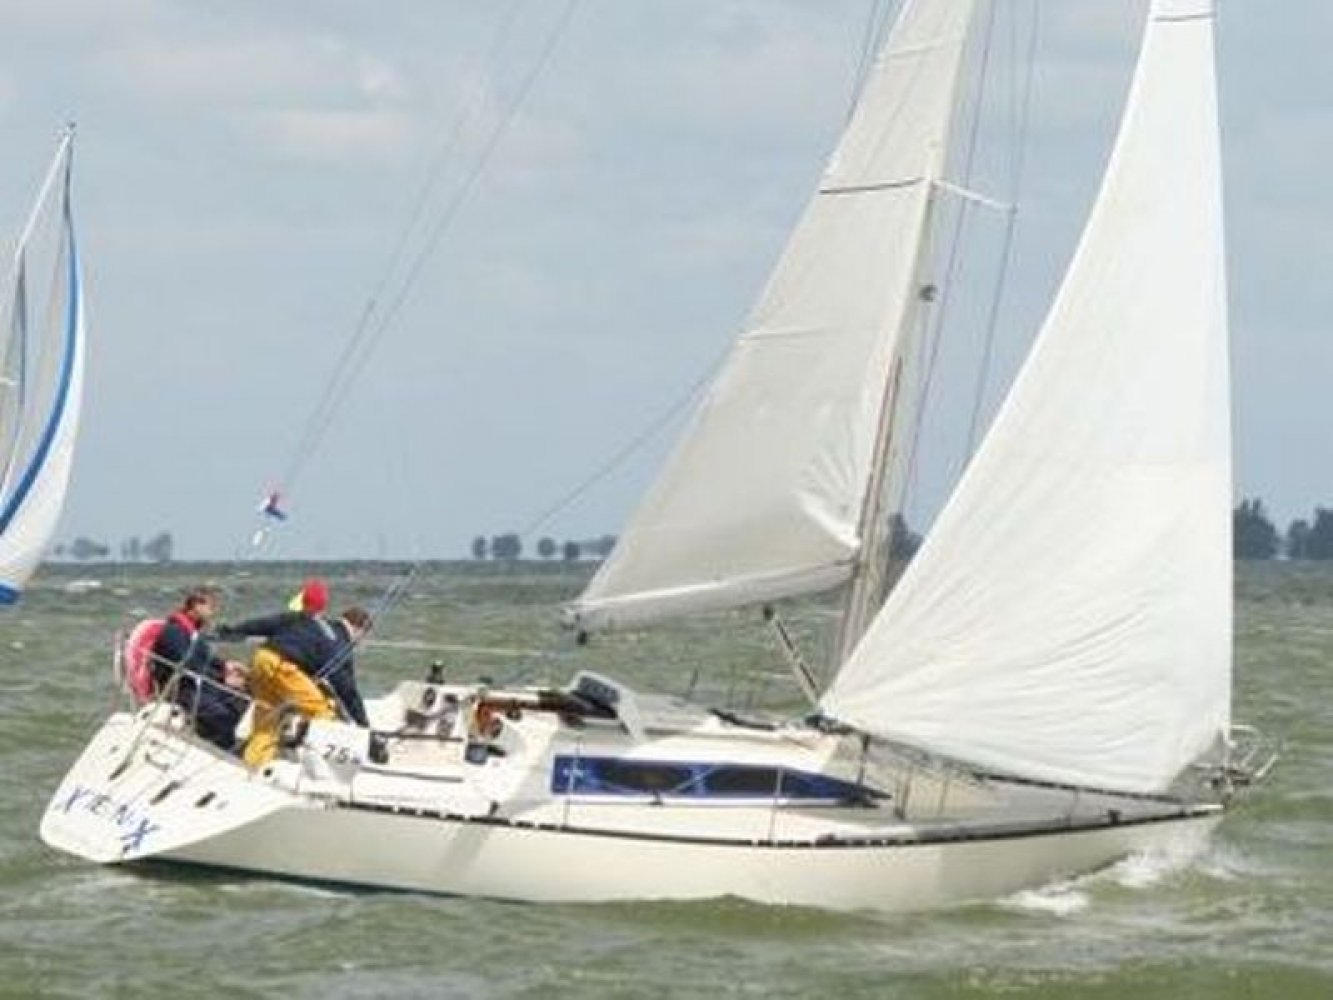 x yachts 372 for sale